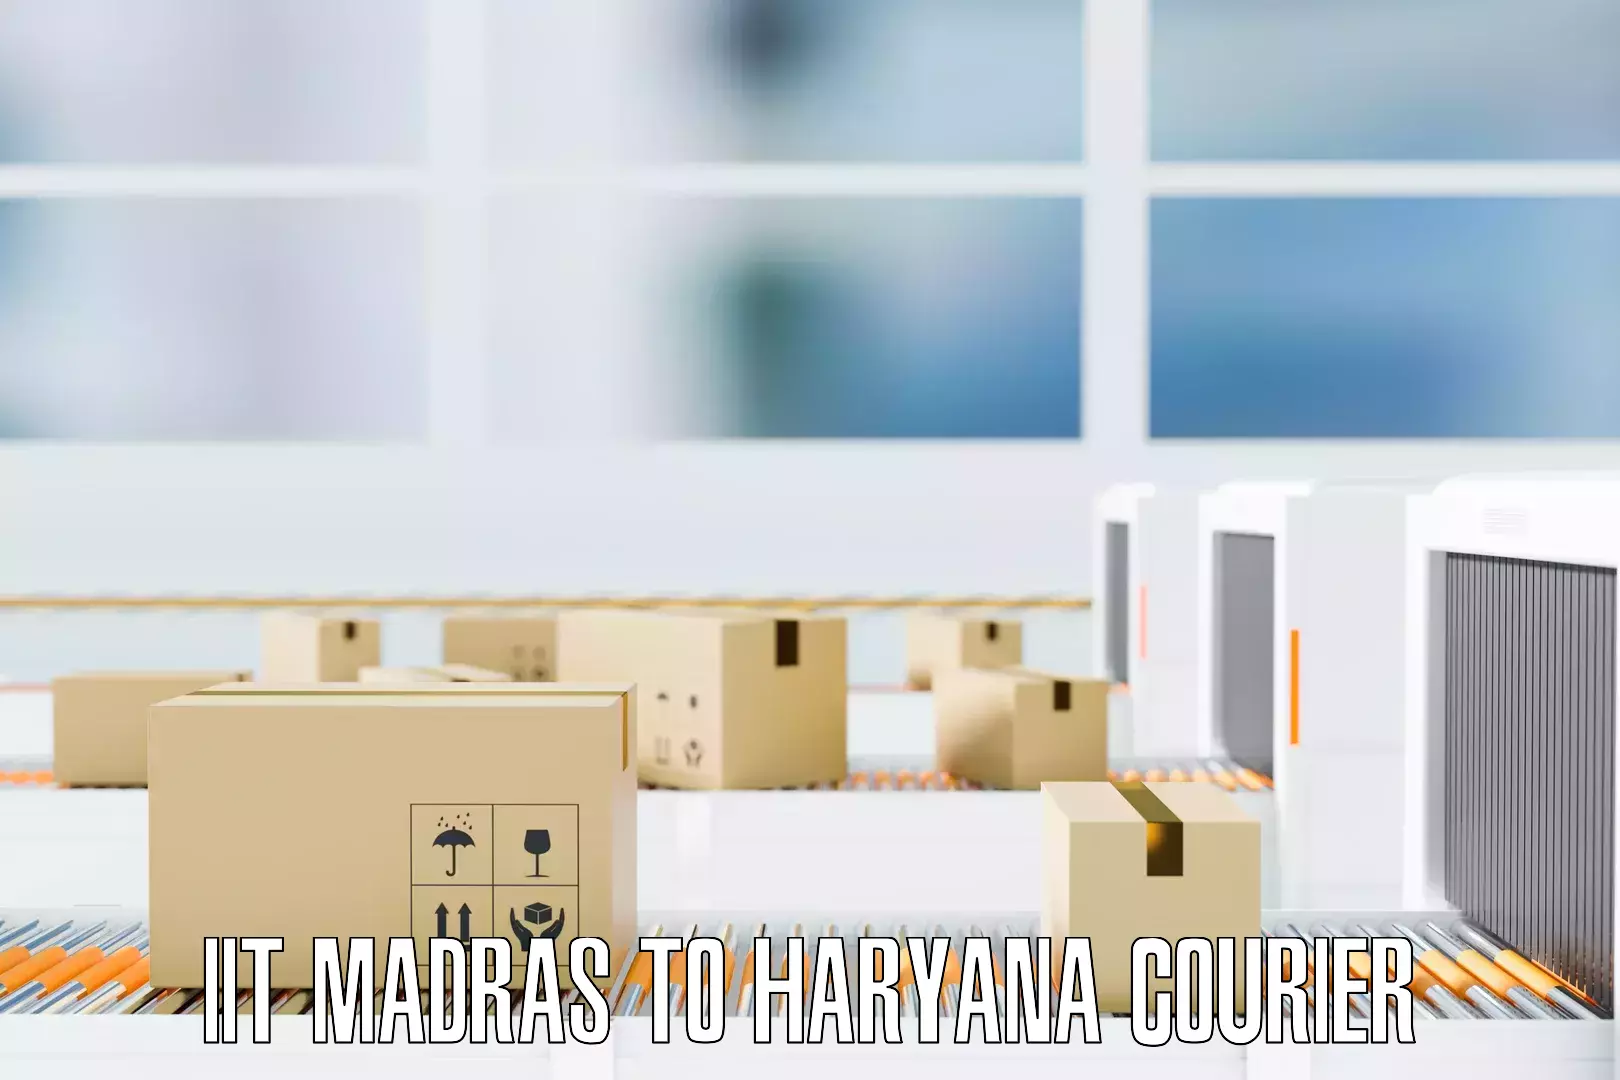 Quality relocation assistance IIT Madras to Gurugram